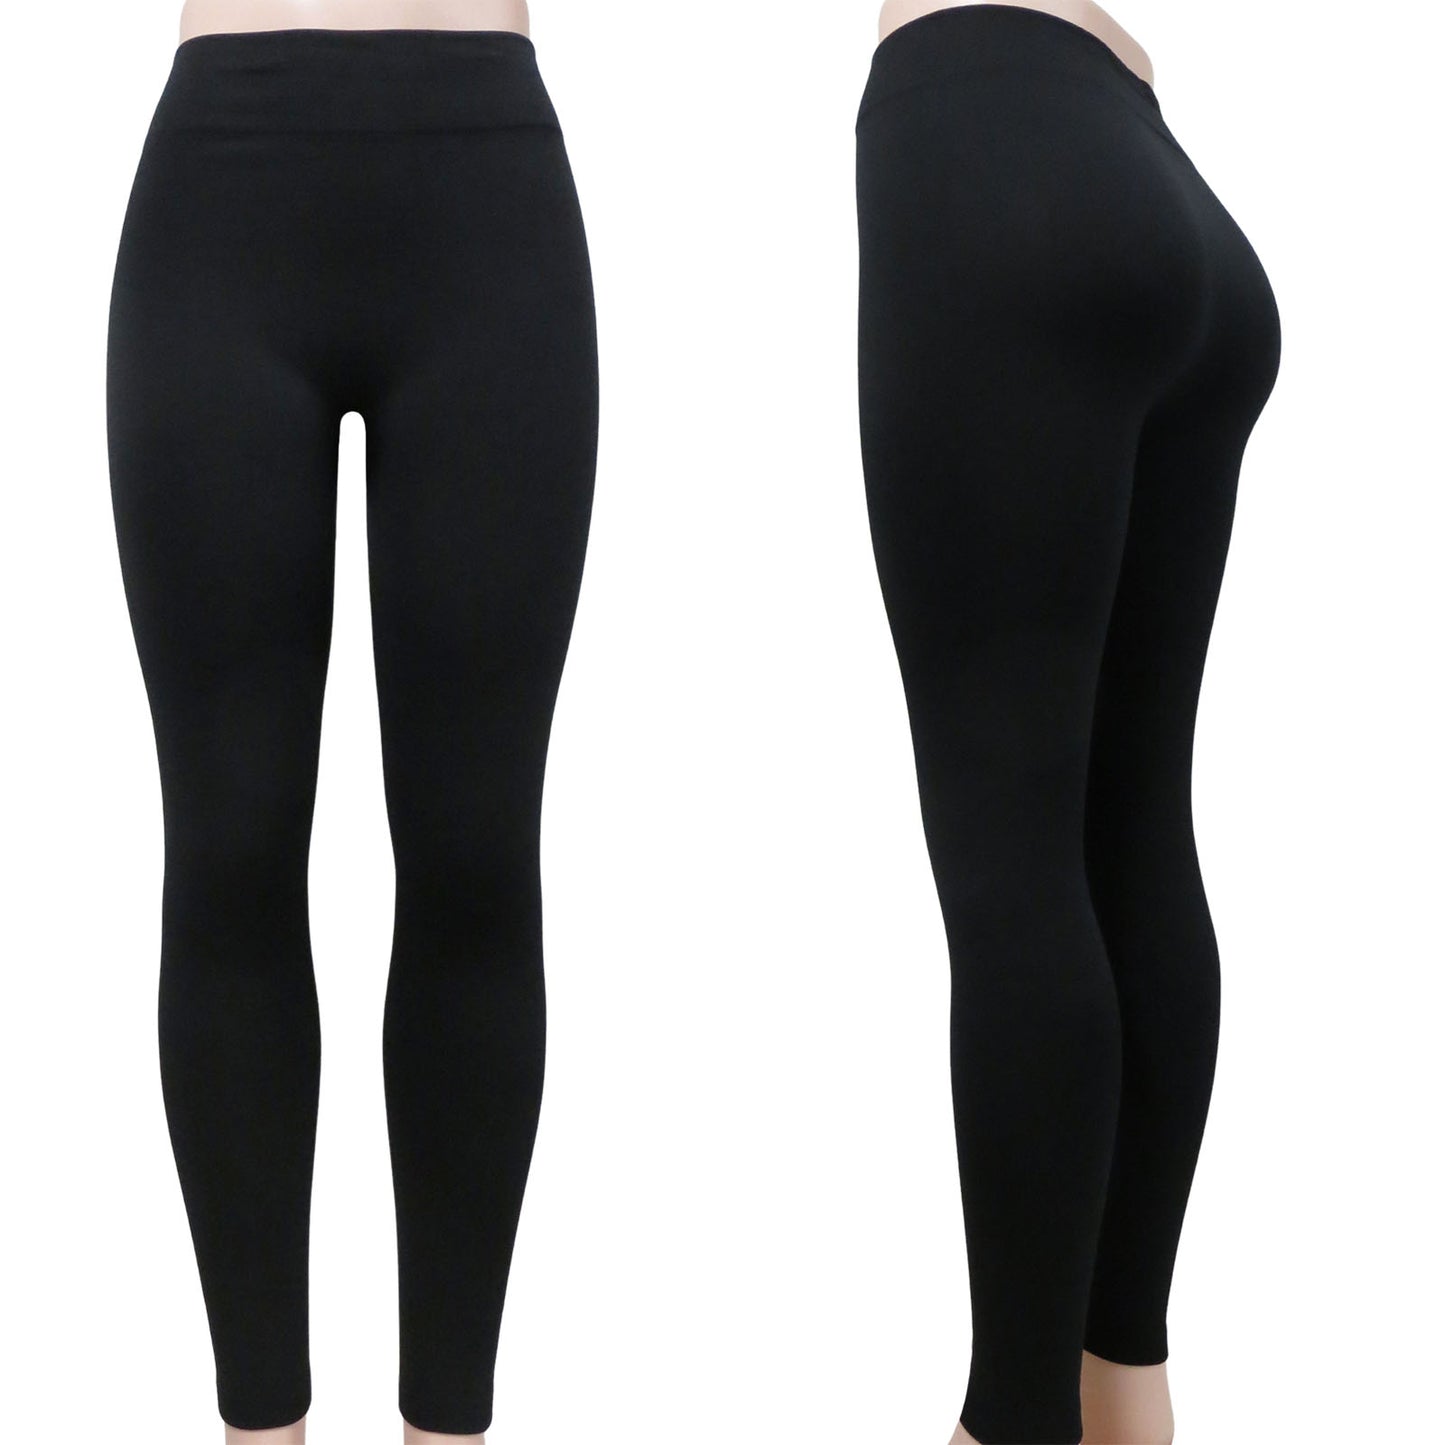 Cool Wholesale fleece lined leggings wholesale In Any Size And Style 